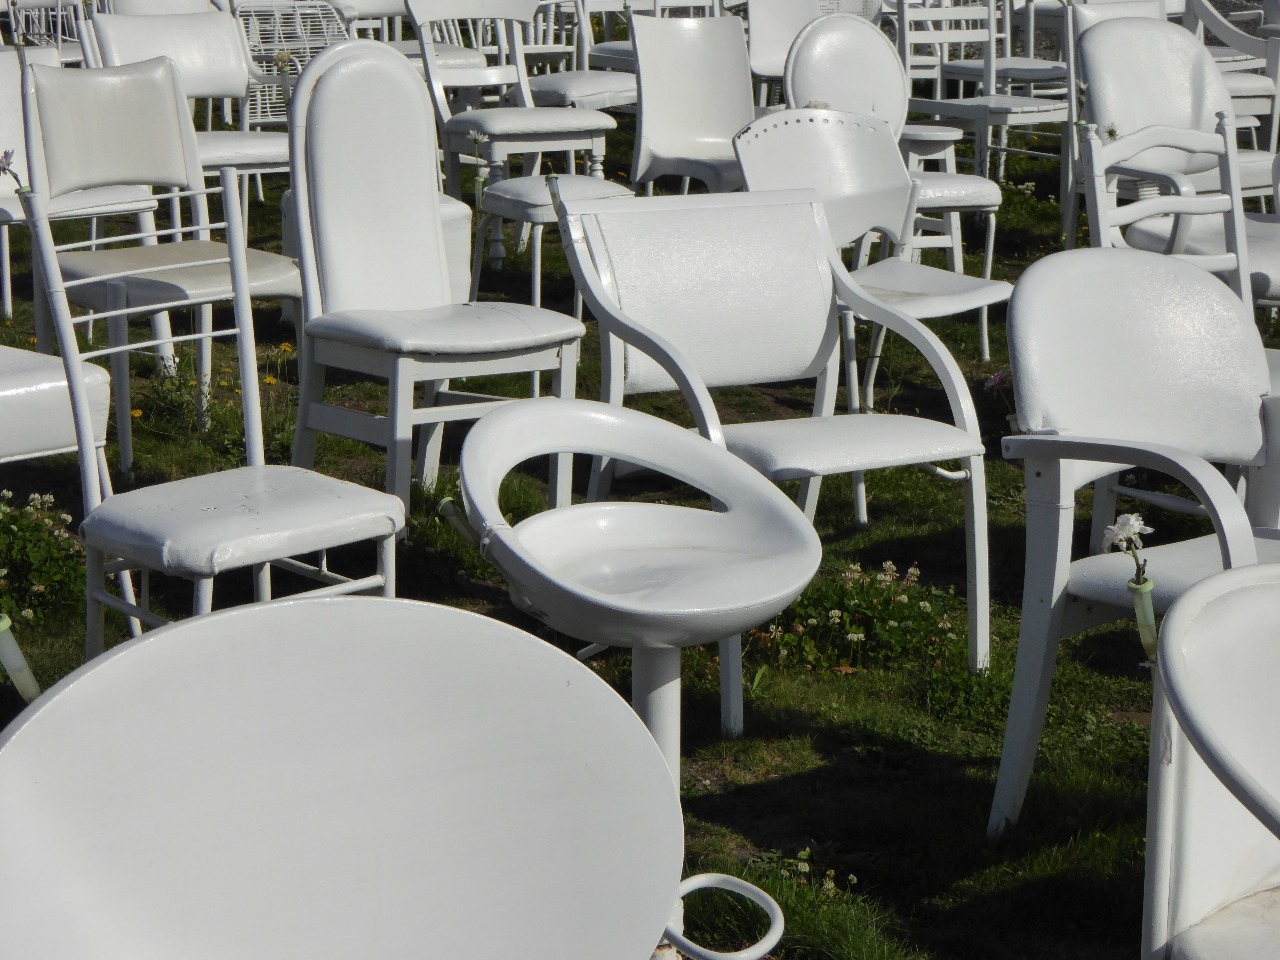 185 chairs memorializing lives lost in earthquake